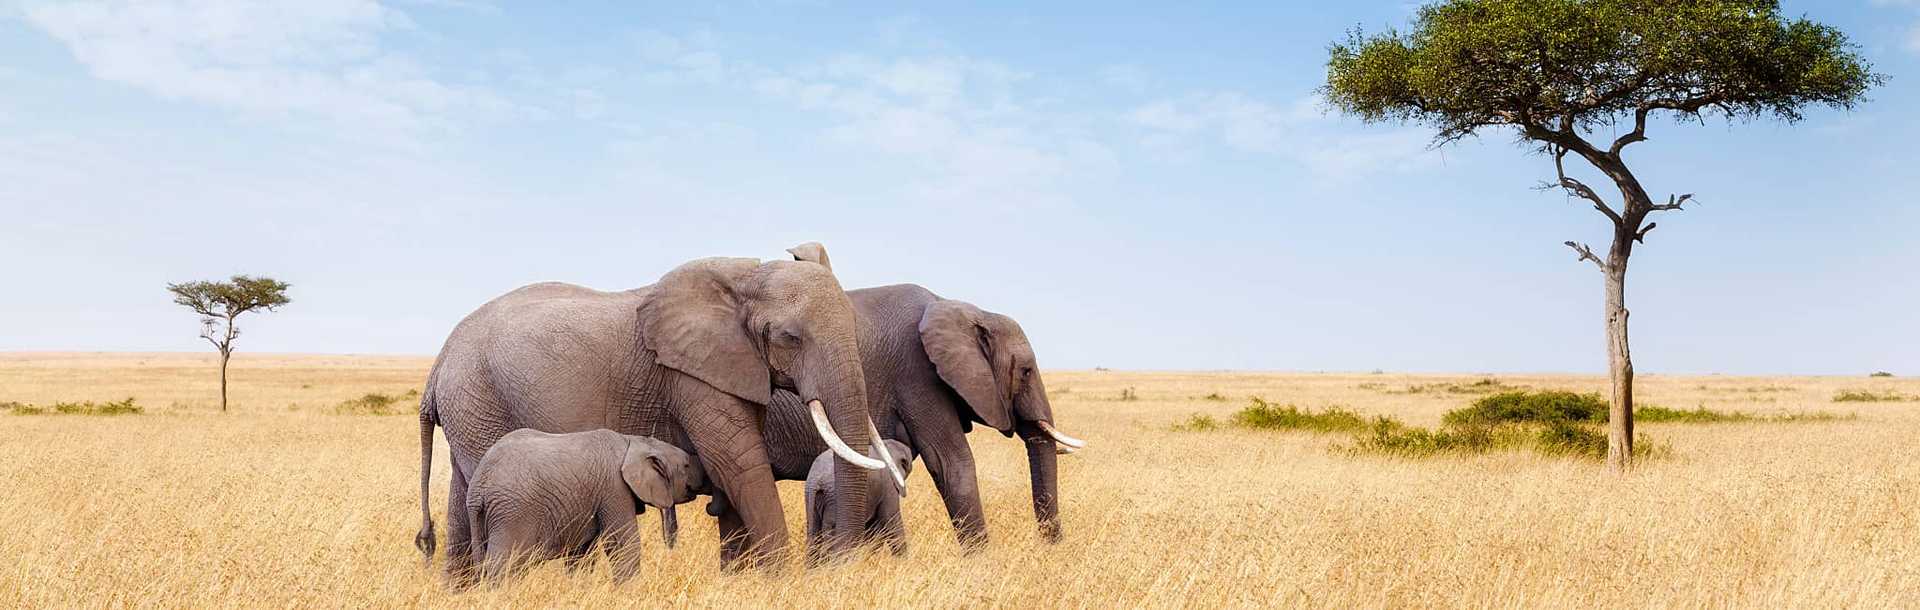 Two adult elephants and calves in the grasslands of Masai Mara with acacia trees